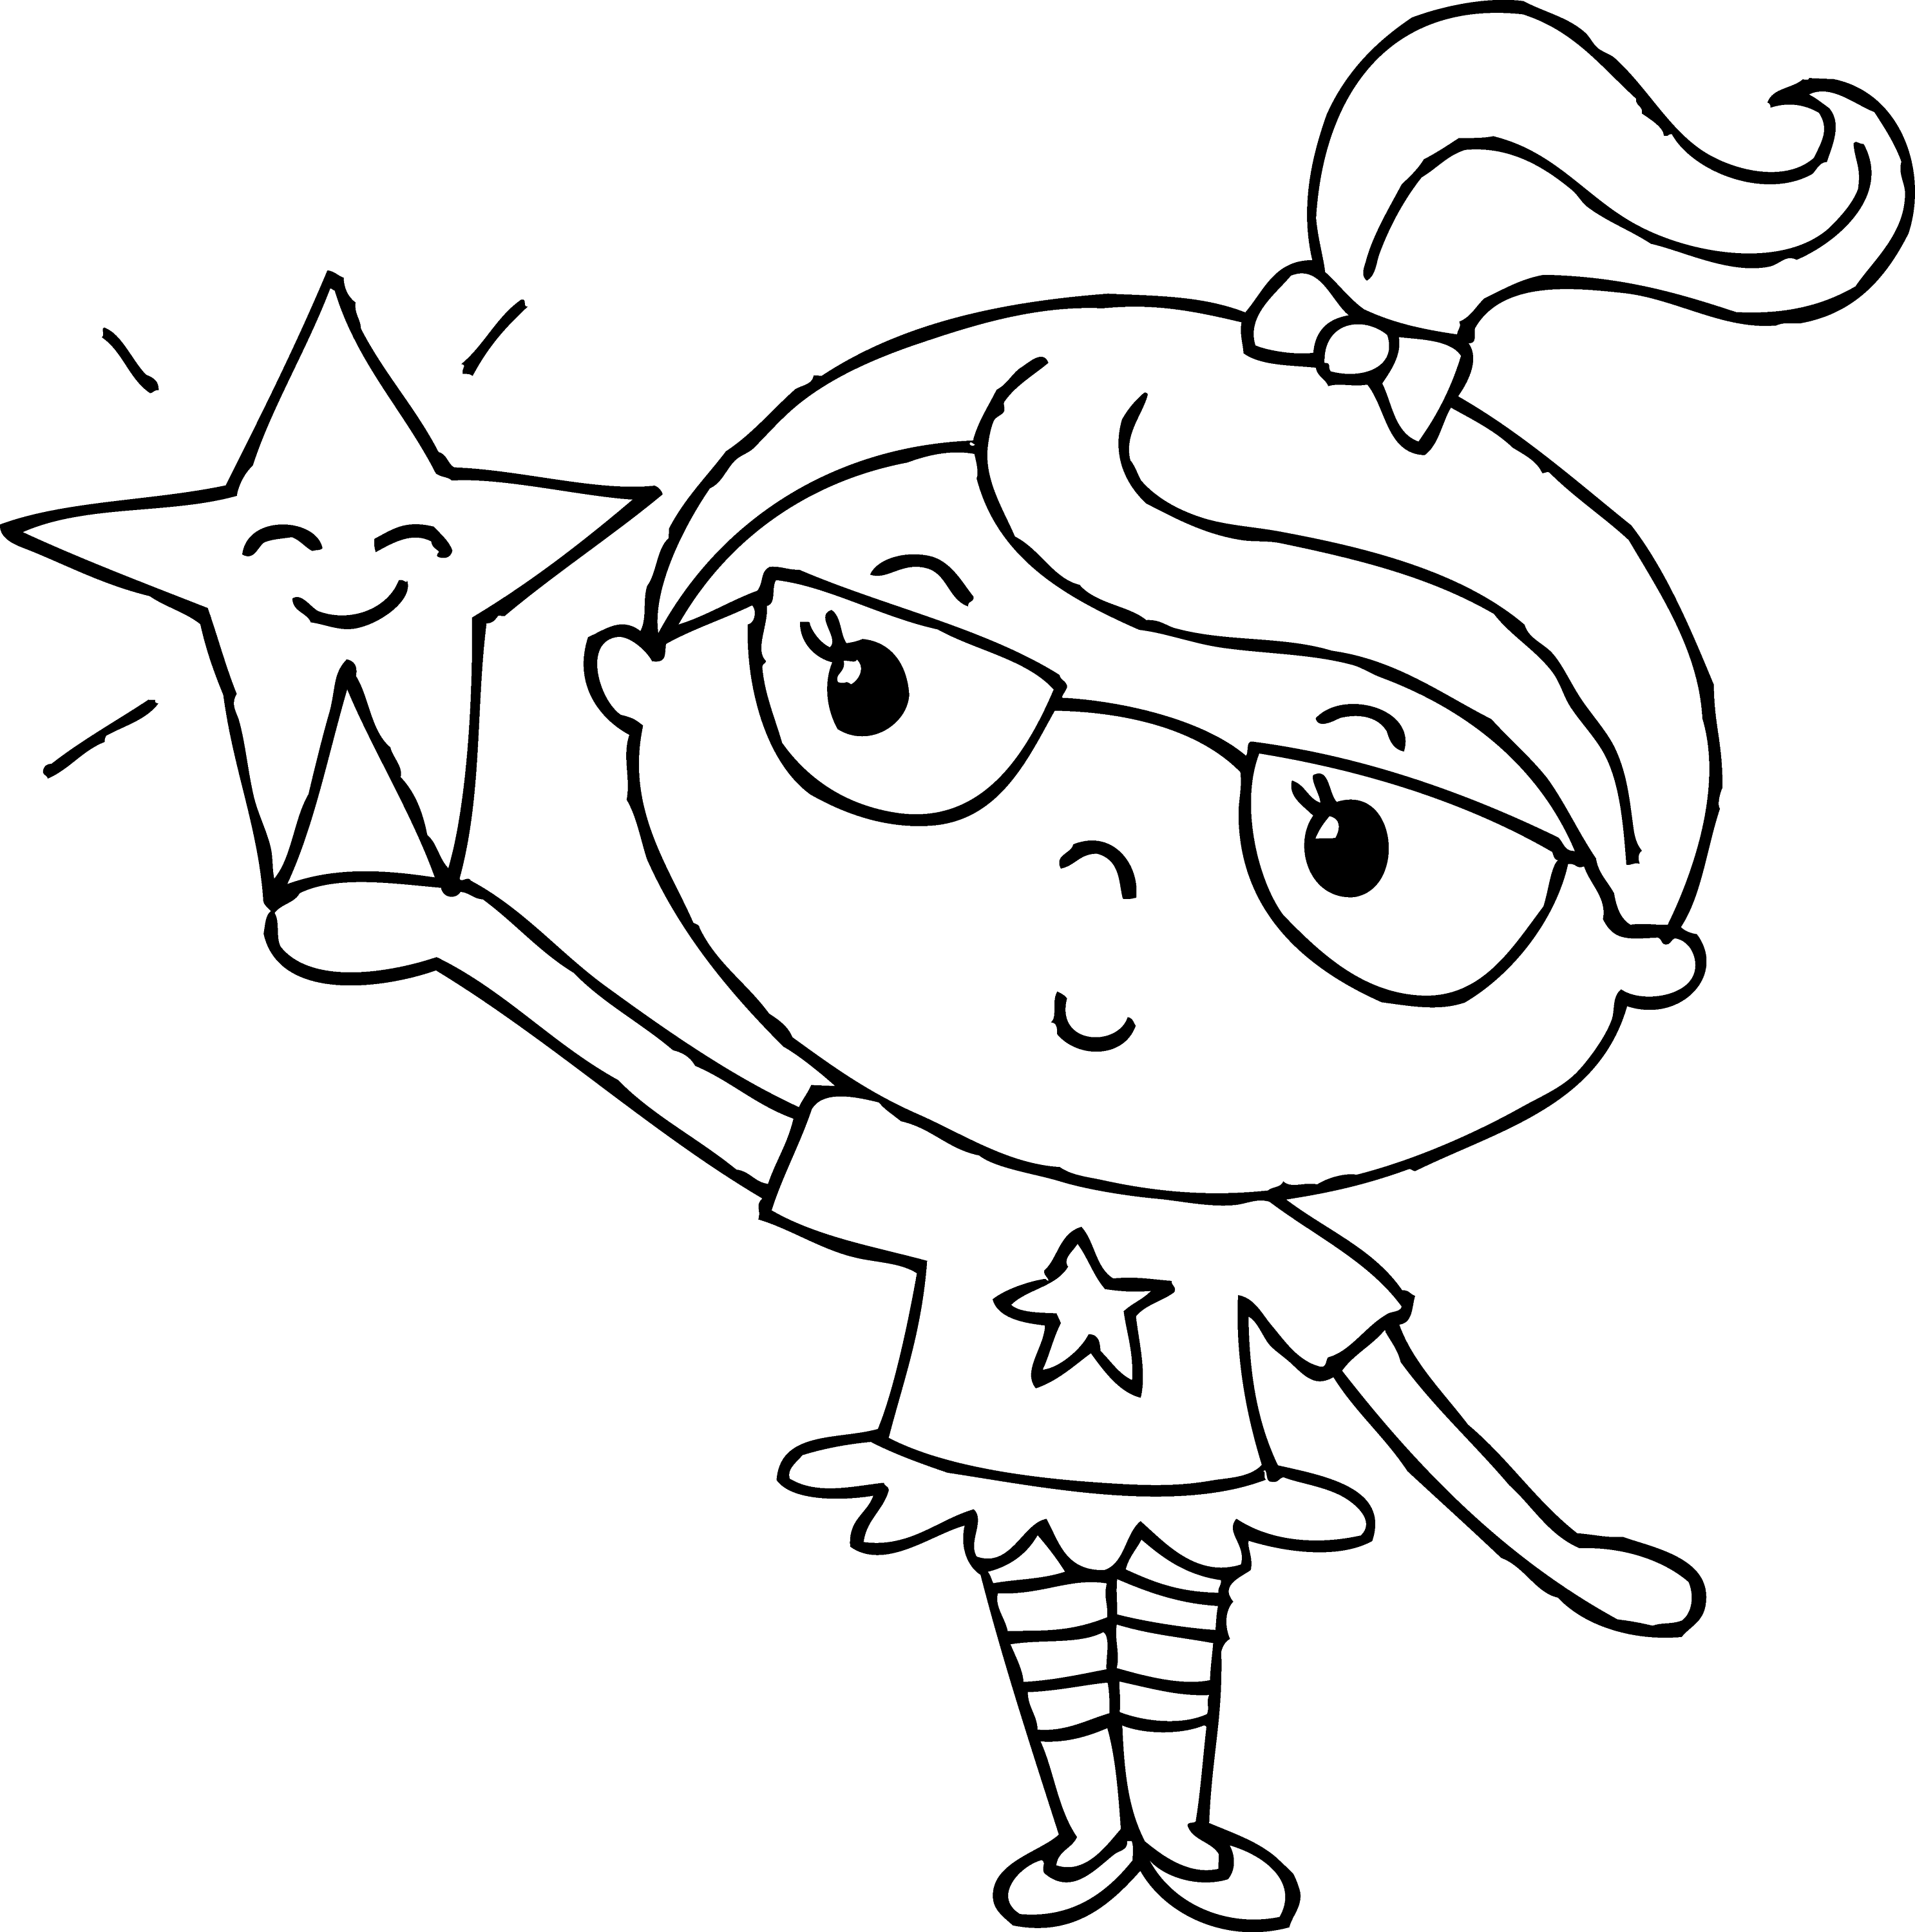 Coloring Page of Girl Holding a Star